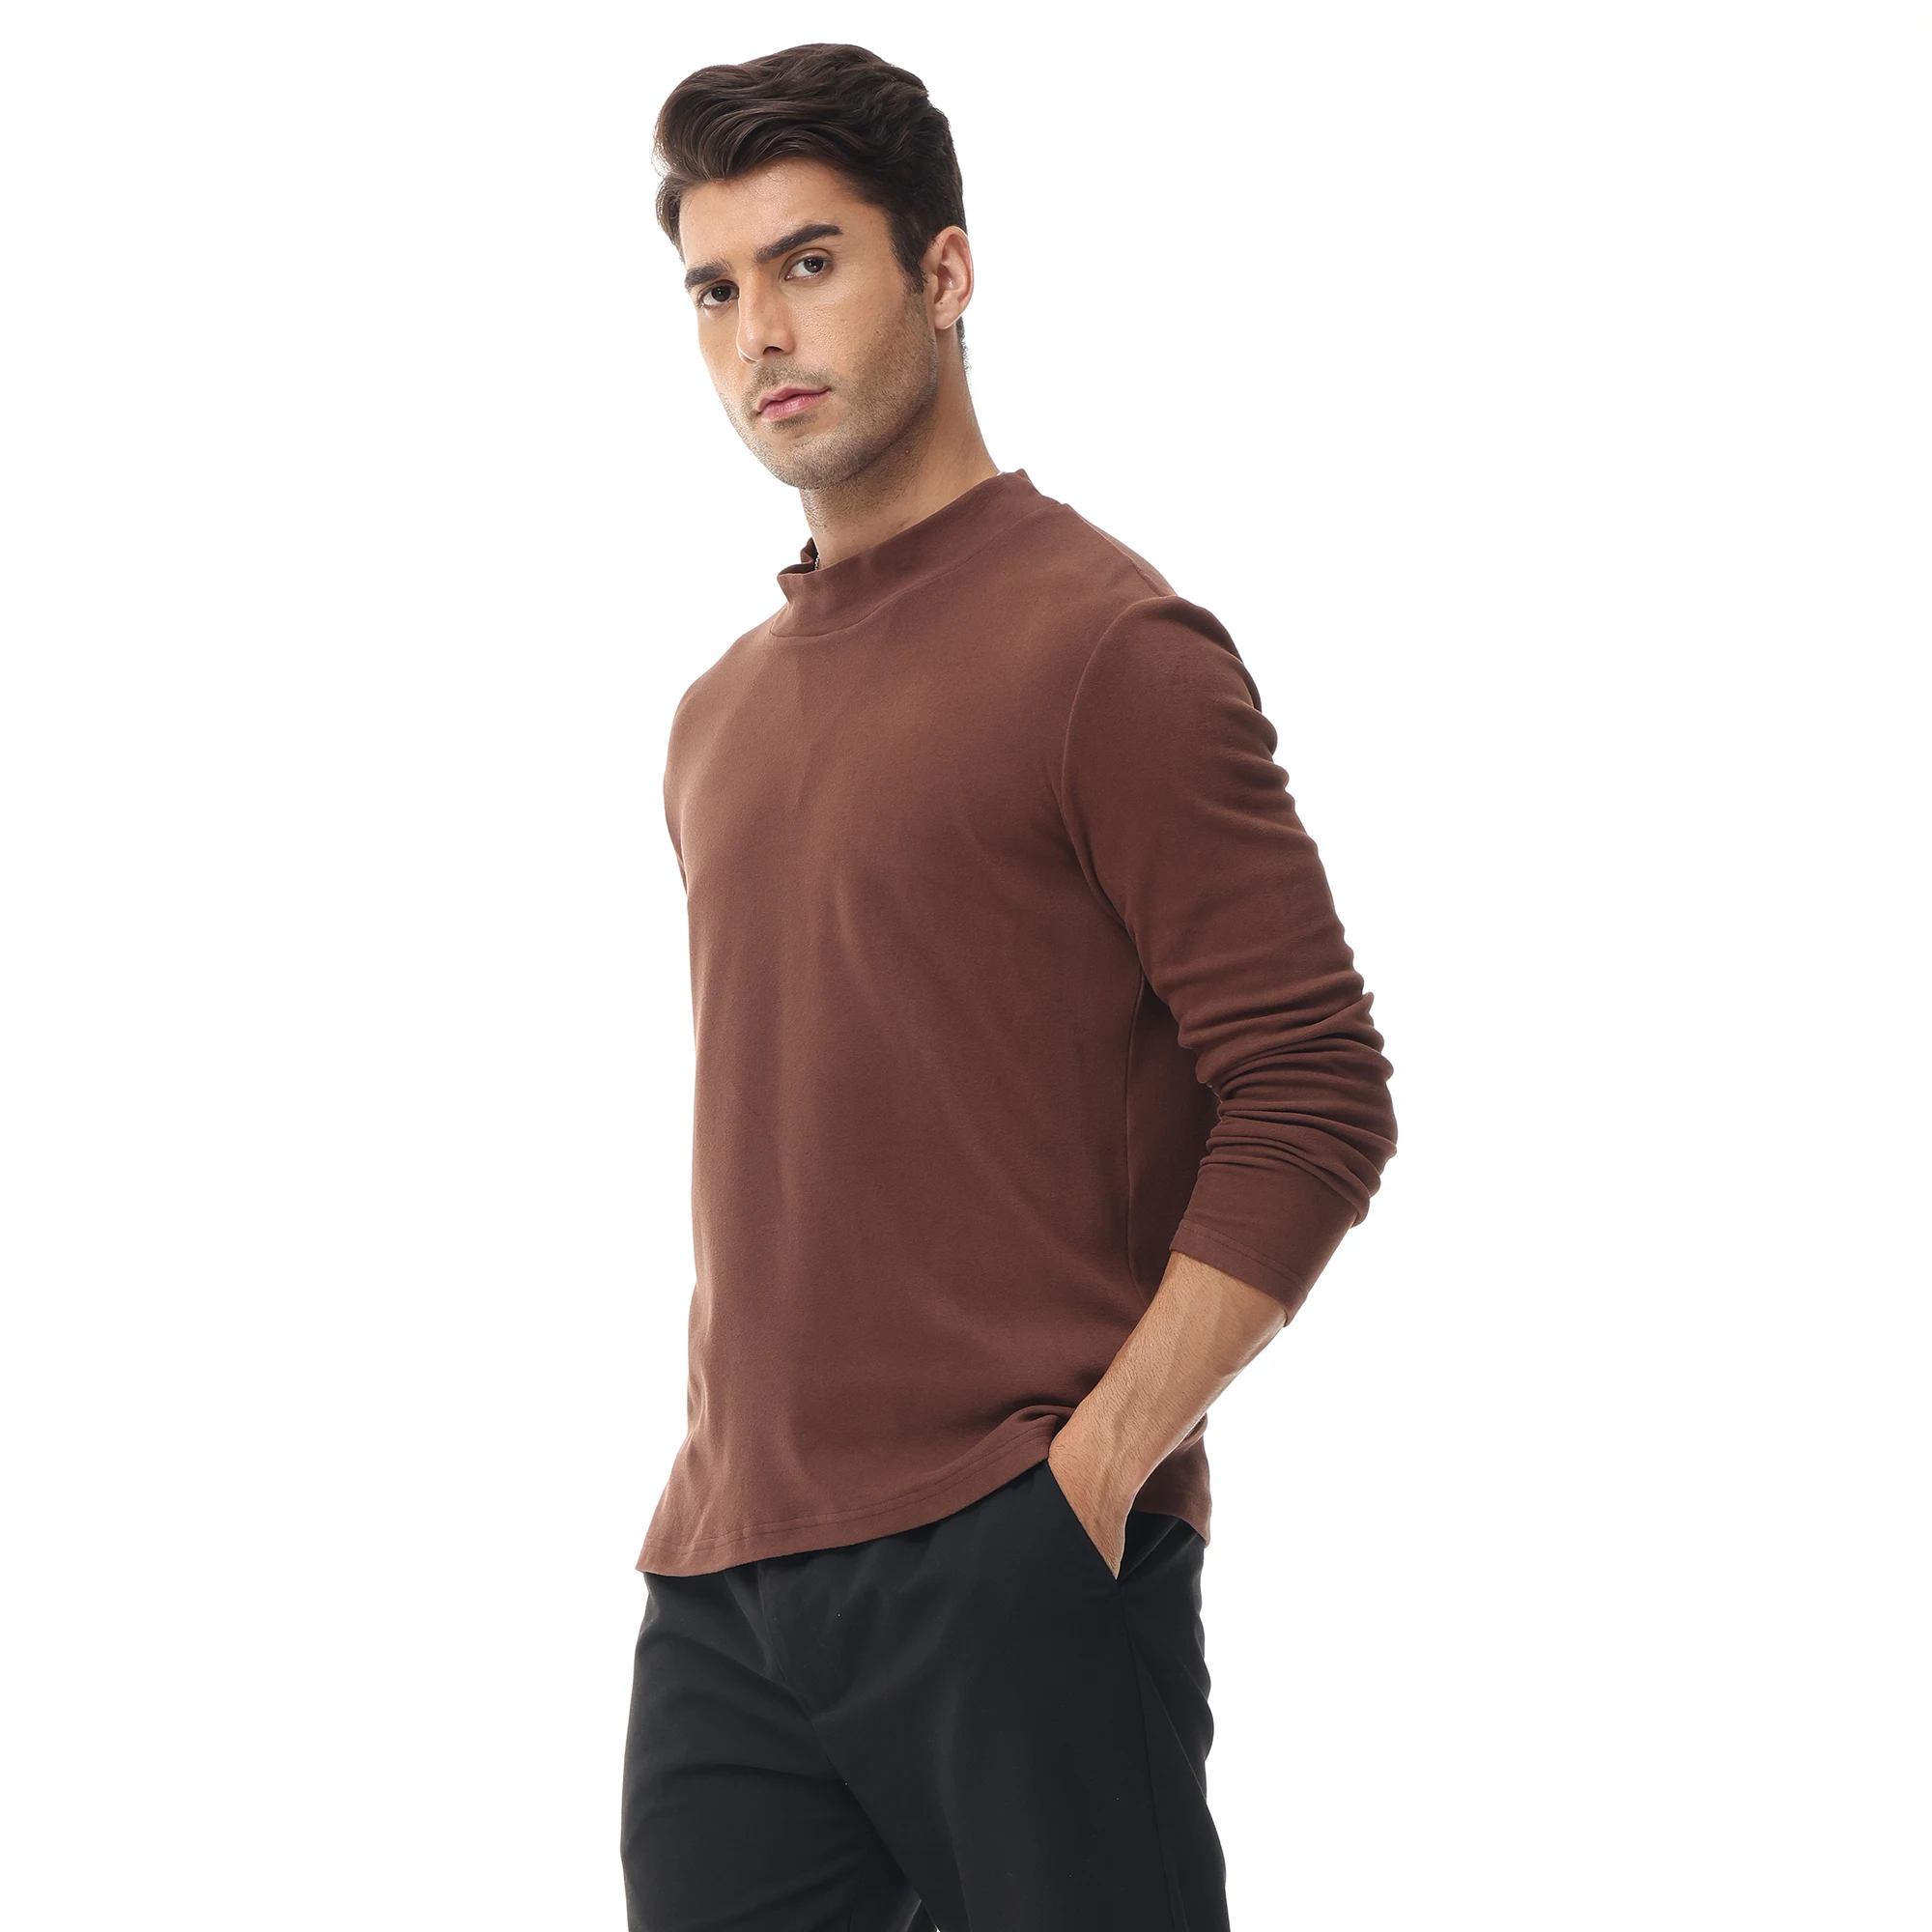 Men's Casual Slim Fit Half Turtleneck Shirts Tight Sweater Warm Sweater Basic Long Sleeve Undershirt Top Knitted High Elastic